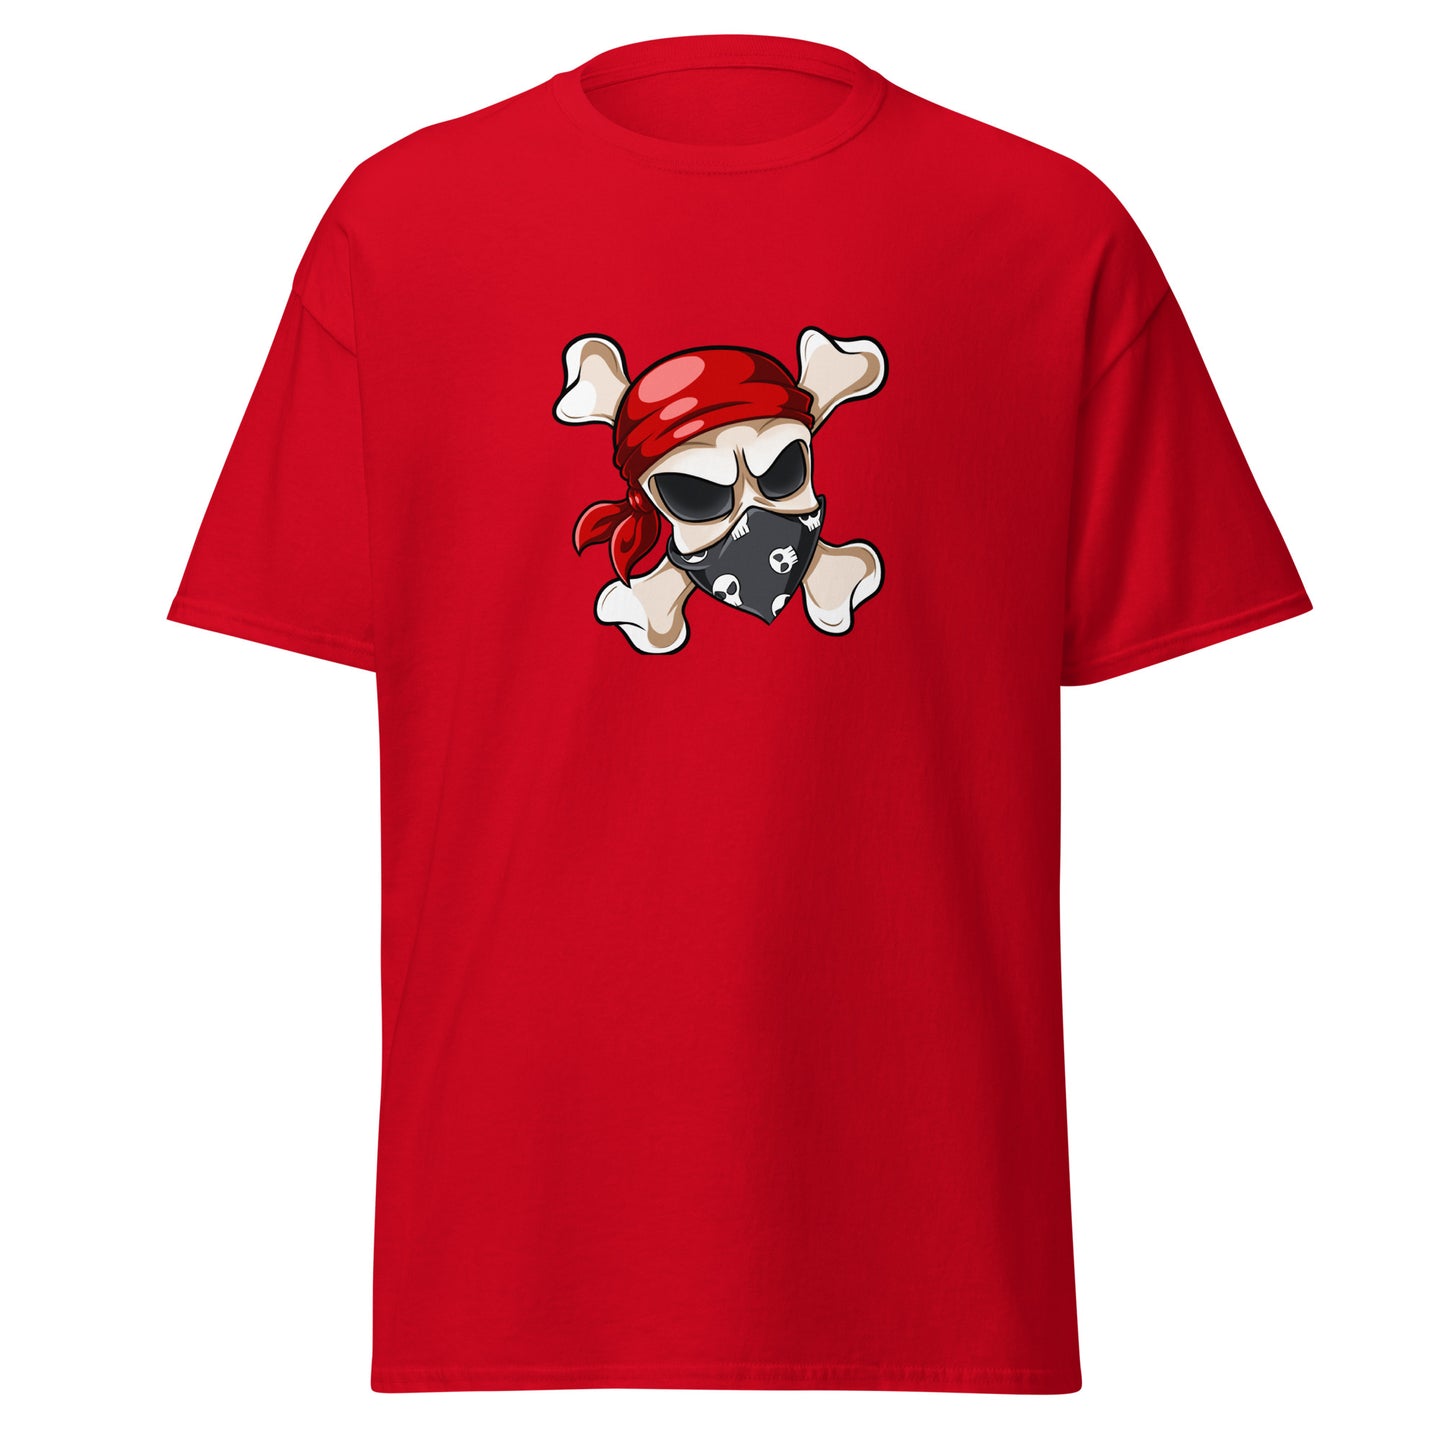 Pirate Skull Gaming Tee - Red Gamer T-Shirt for Twitch Streamers & Discord Enthusiasts